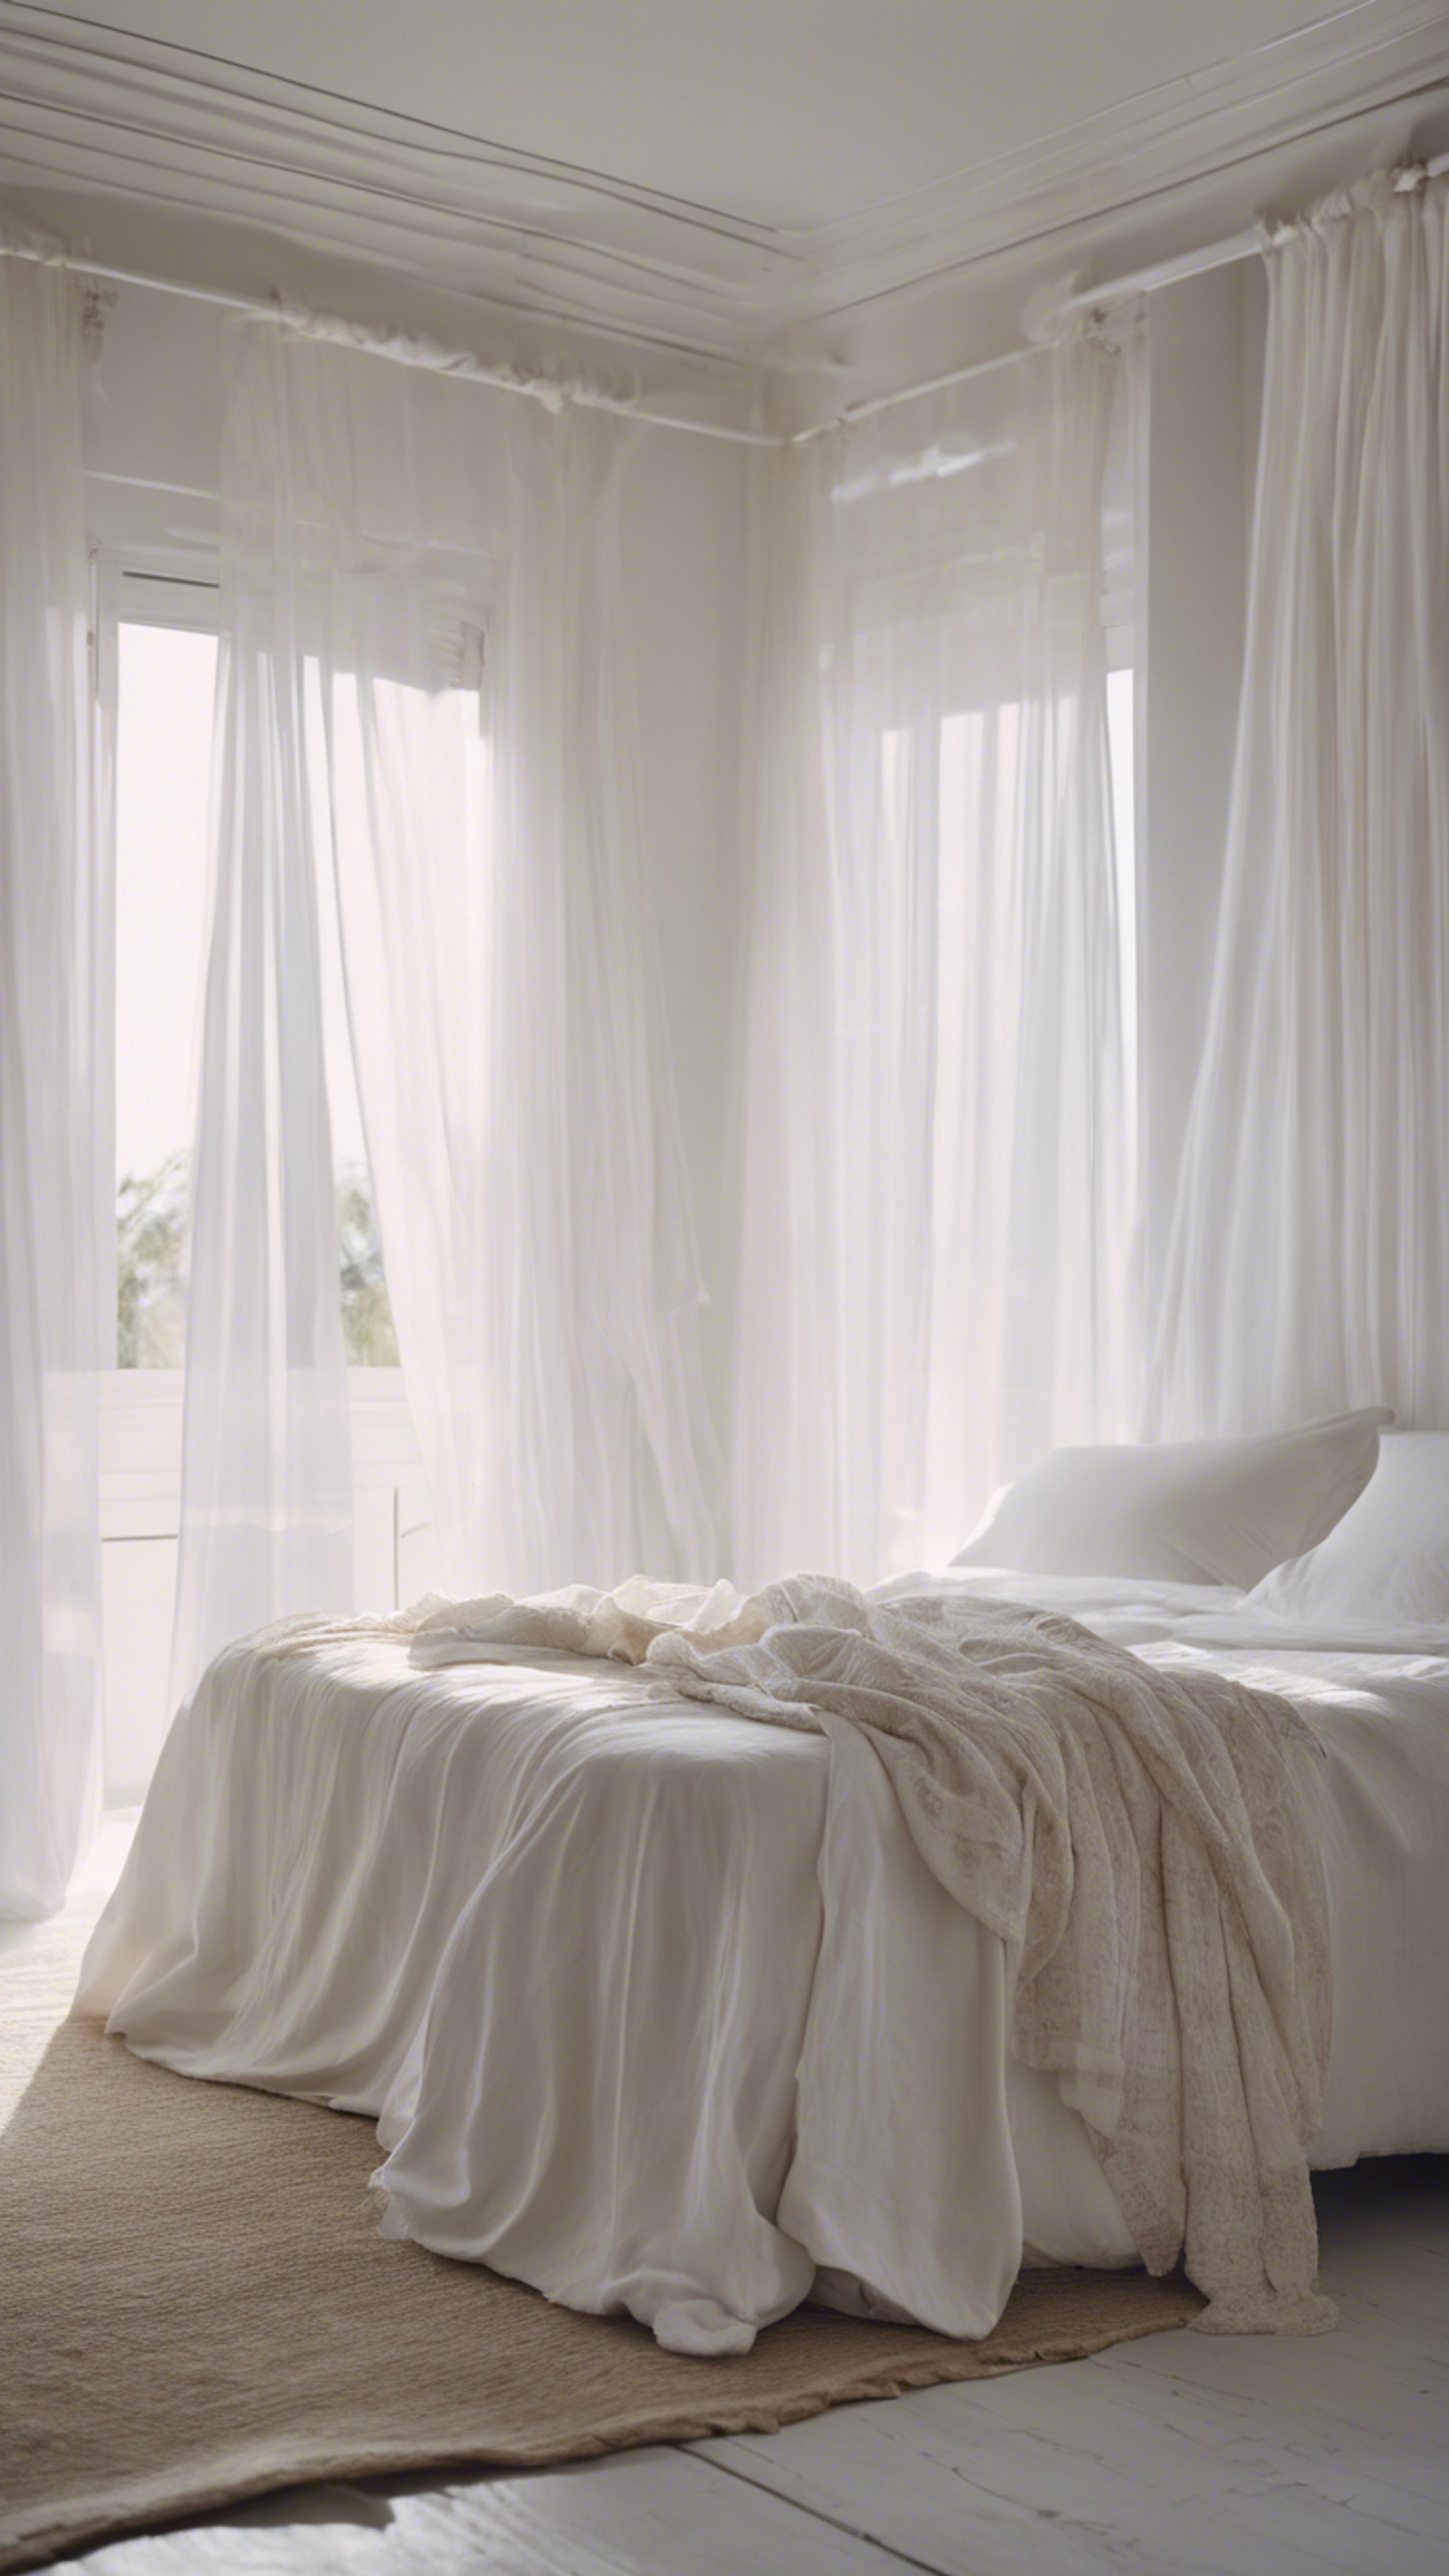 A dreamy white bedroom with sheer curtains blowing in the wind, white bed linens and an array of daylight from the window. Wallpaper[01f8a65ac1ab4b5d8d2d]